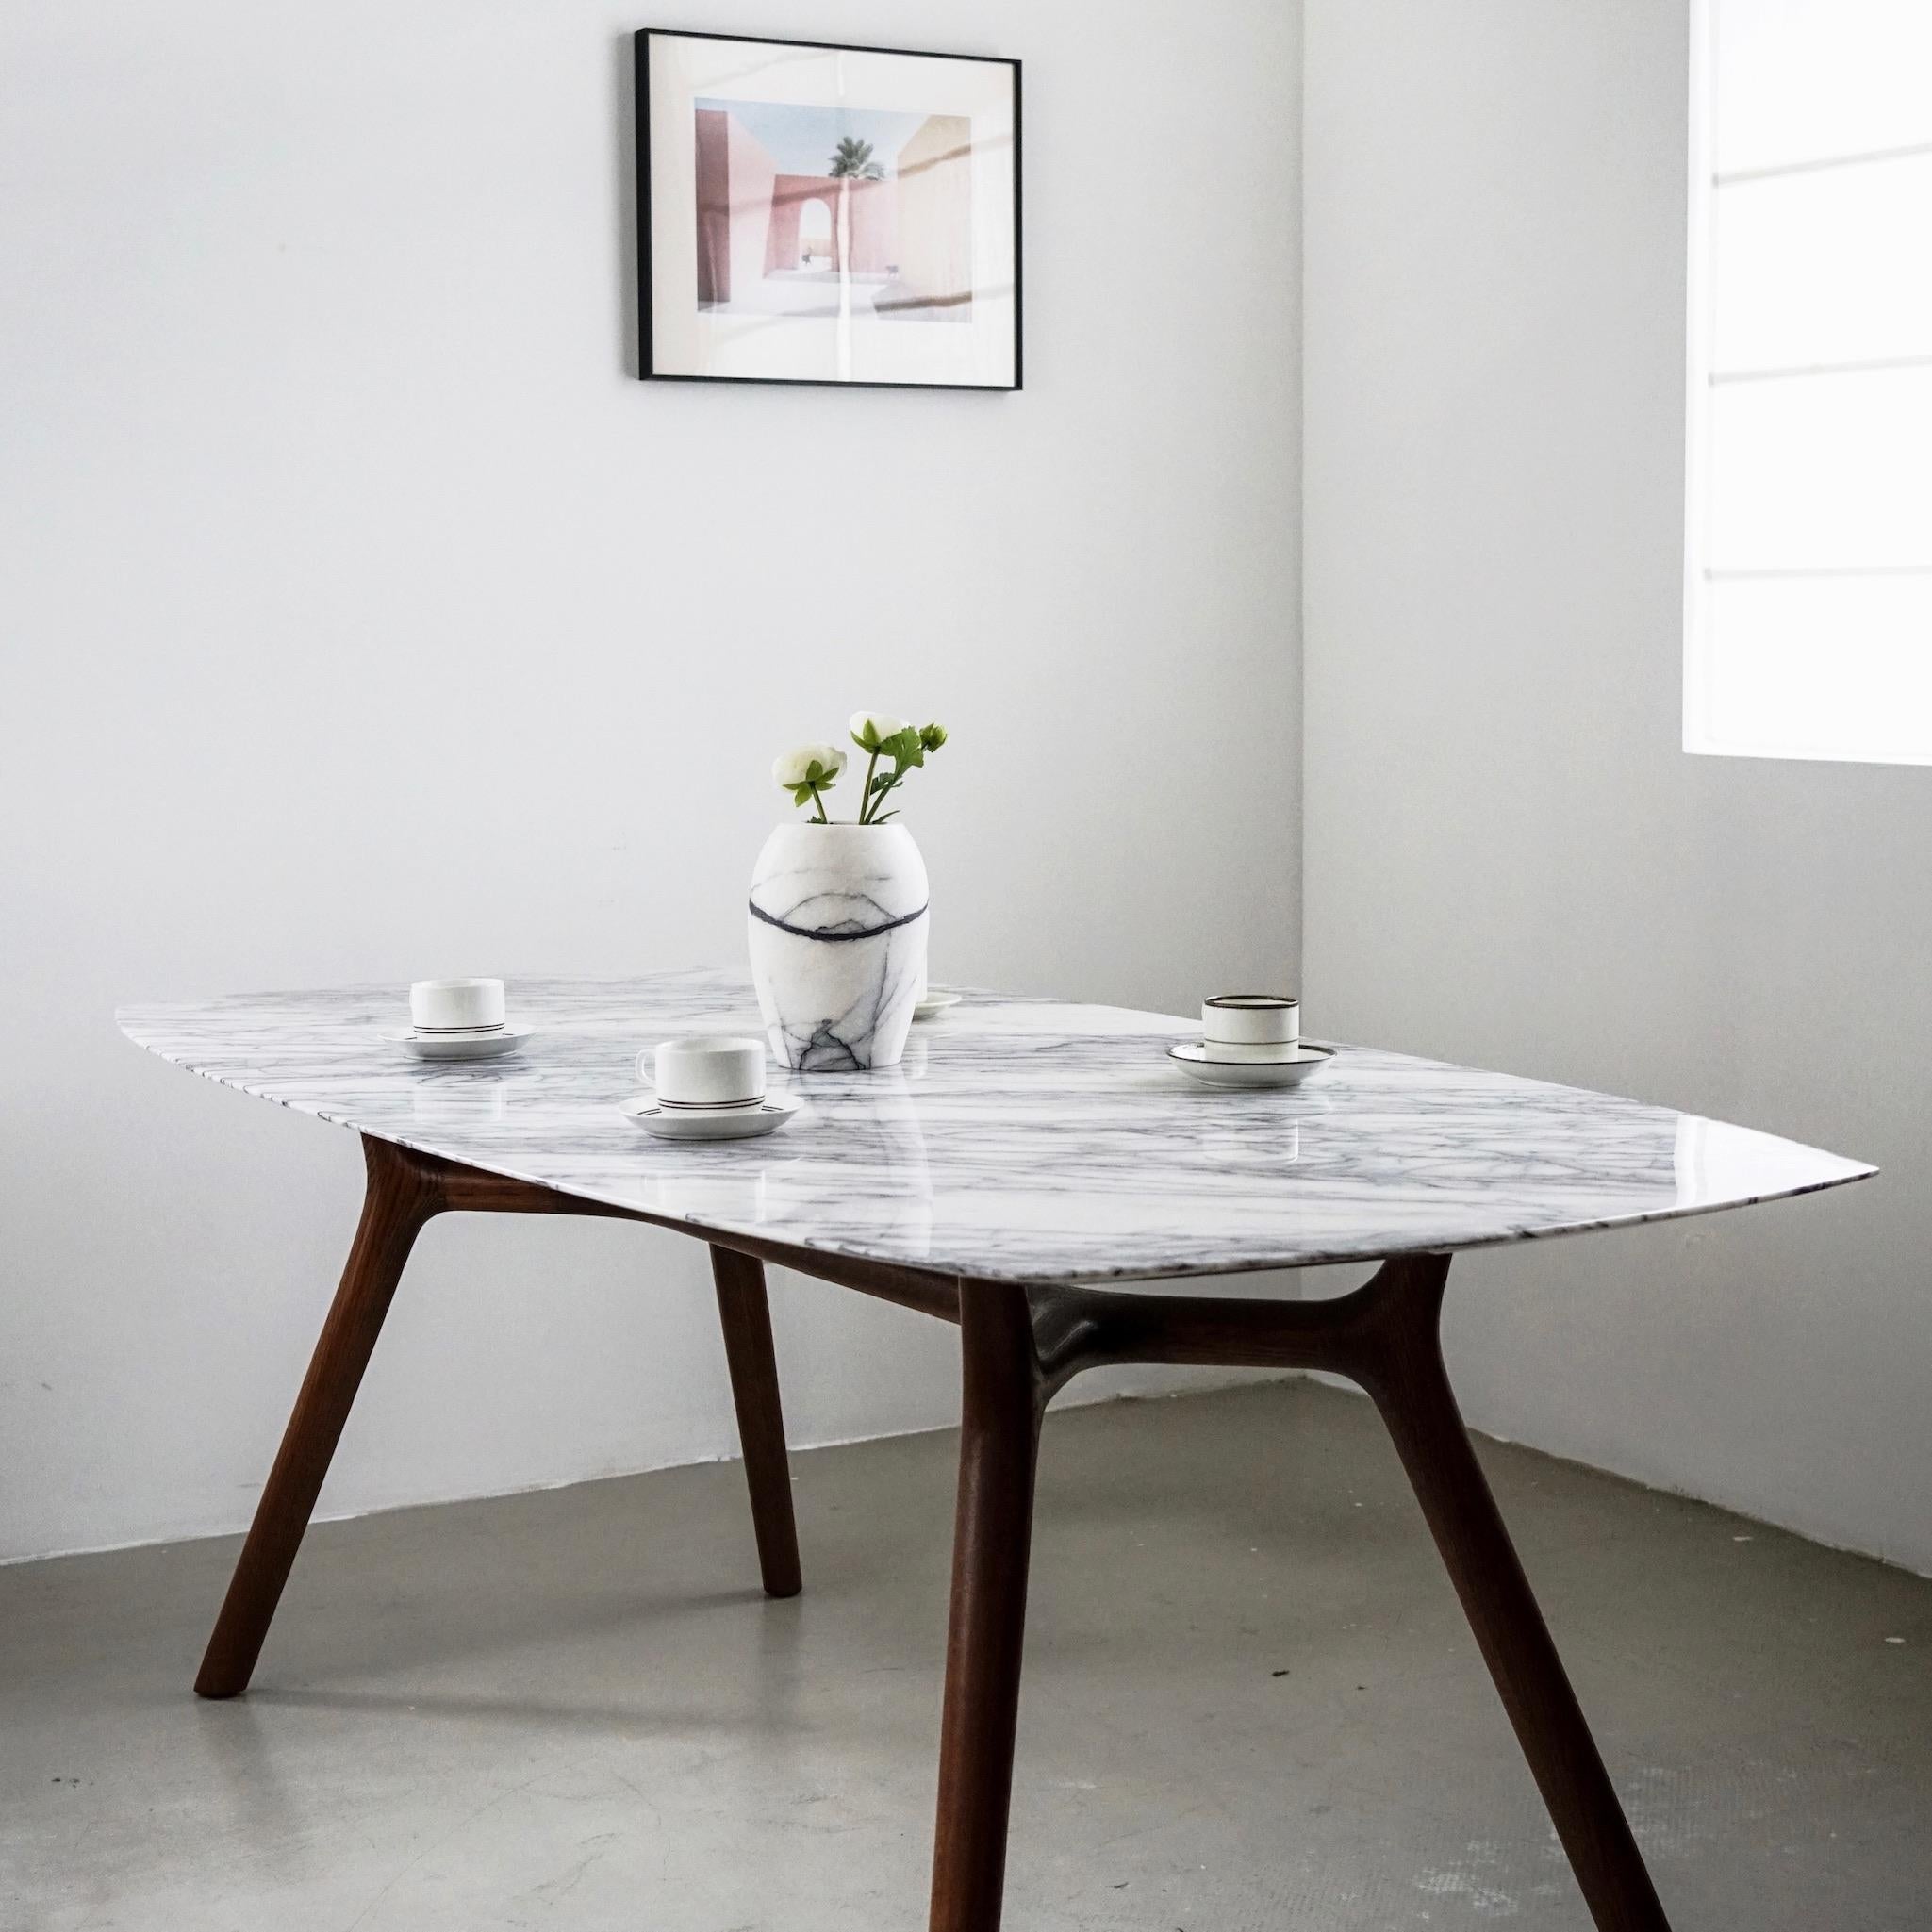 Travertine NORDST POUL Dining Table, Italian White Montain Marble, Danish Modern Design For Sale